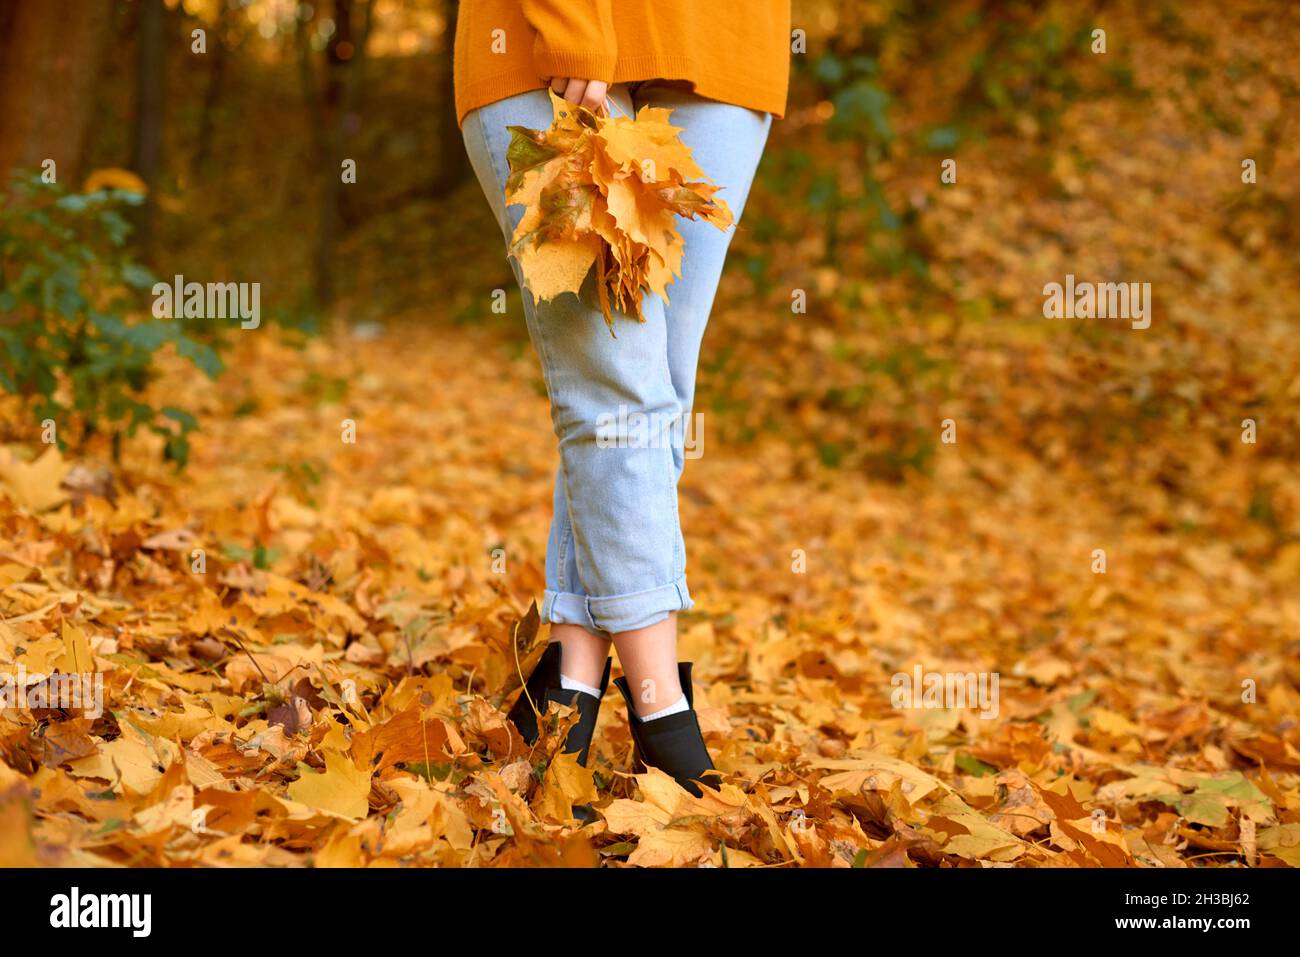 woman legs in jeans and boots stand in fallen leaves. copy space. shallow depth of field Stock Photo